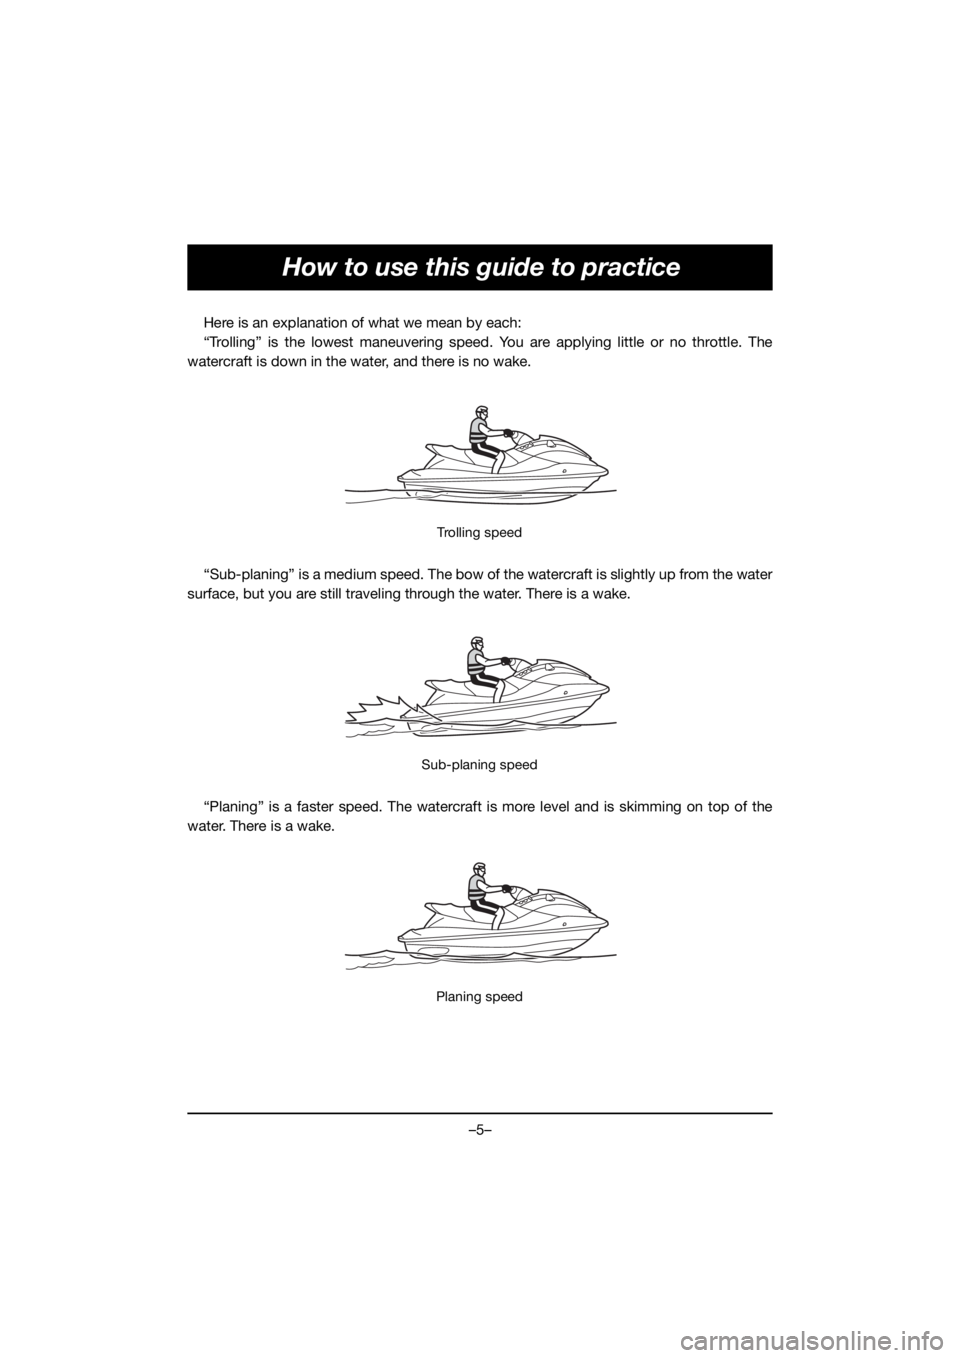 YAMAHA EX 2020  Manual de utilização (in Portuguese) –5–
How to use this guide to practice
Here is an explanation of what we mean by each:
“Trolling” is the lowest maneuvering speed. You are applying little or no throttle. The
watercraft is down